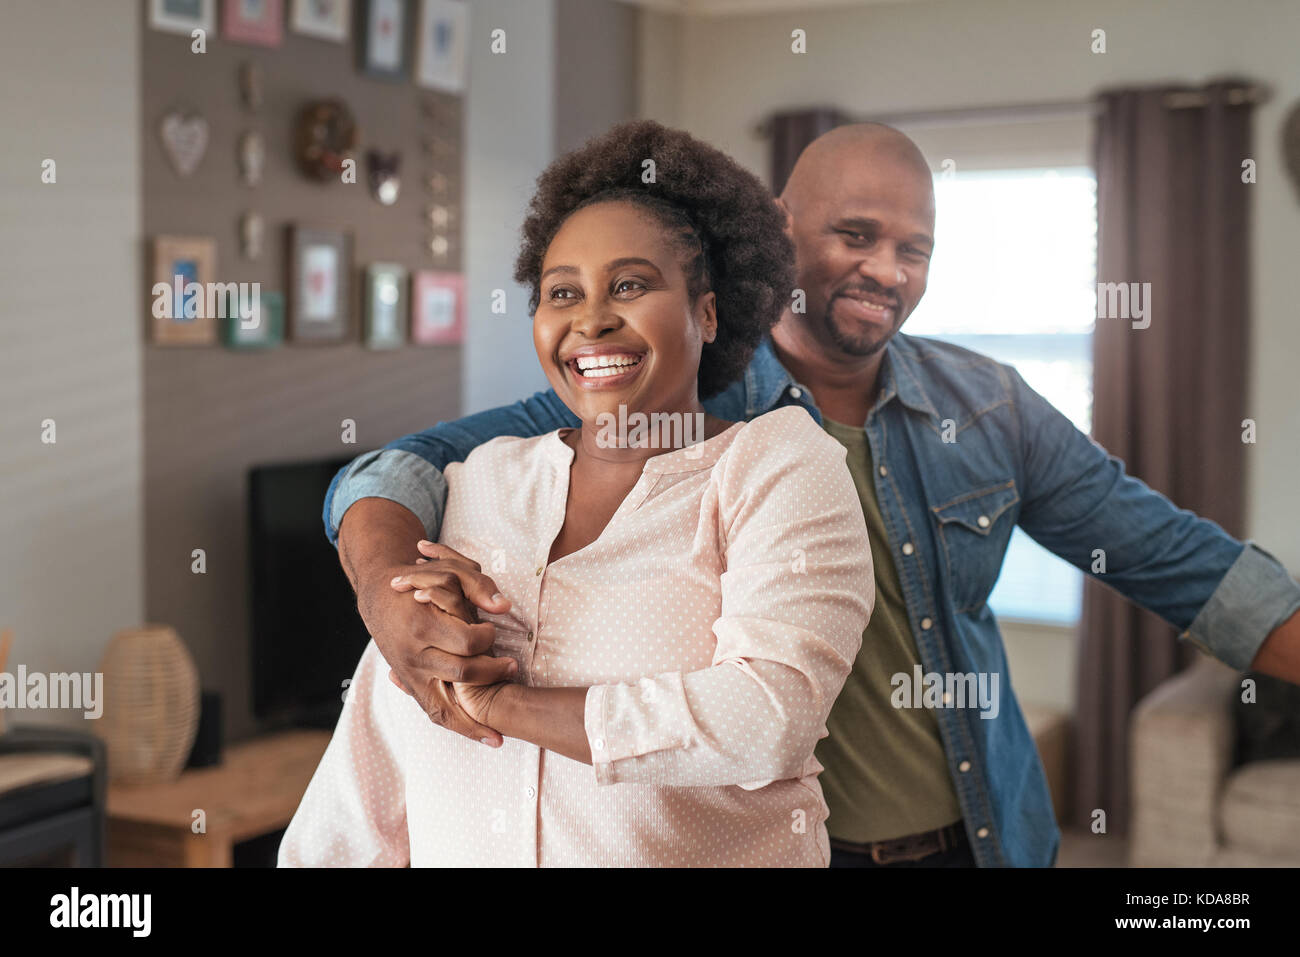 Laughing African couple enjoying a playful moment together at home Stock Photo